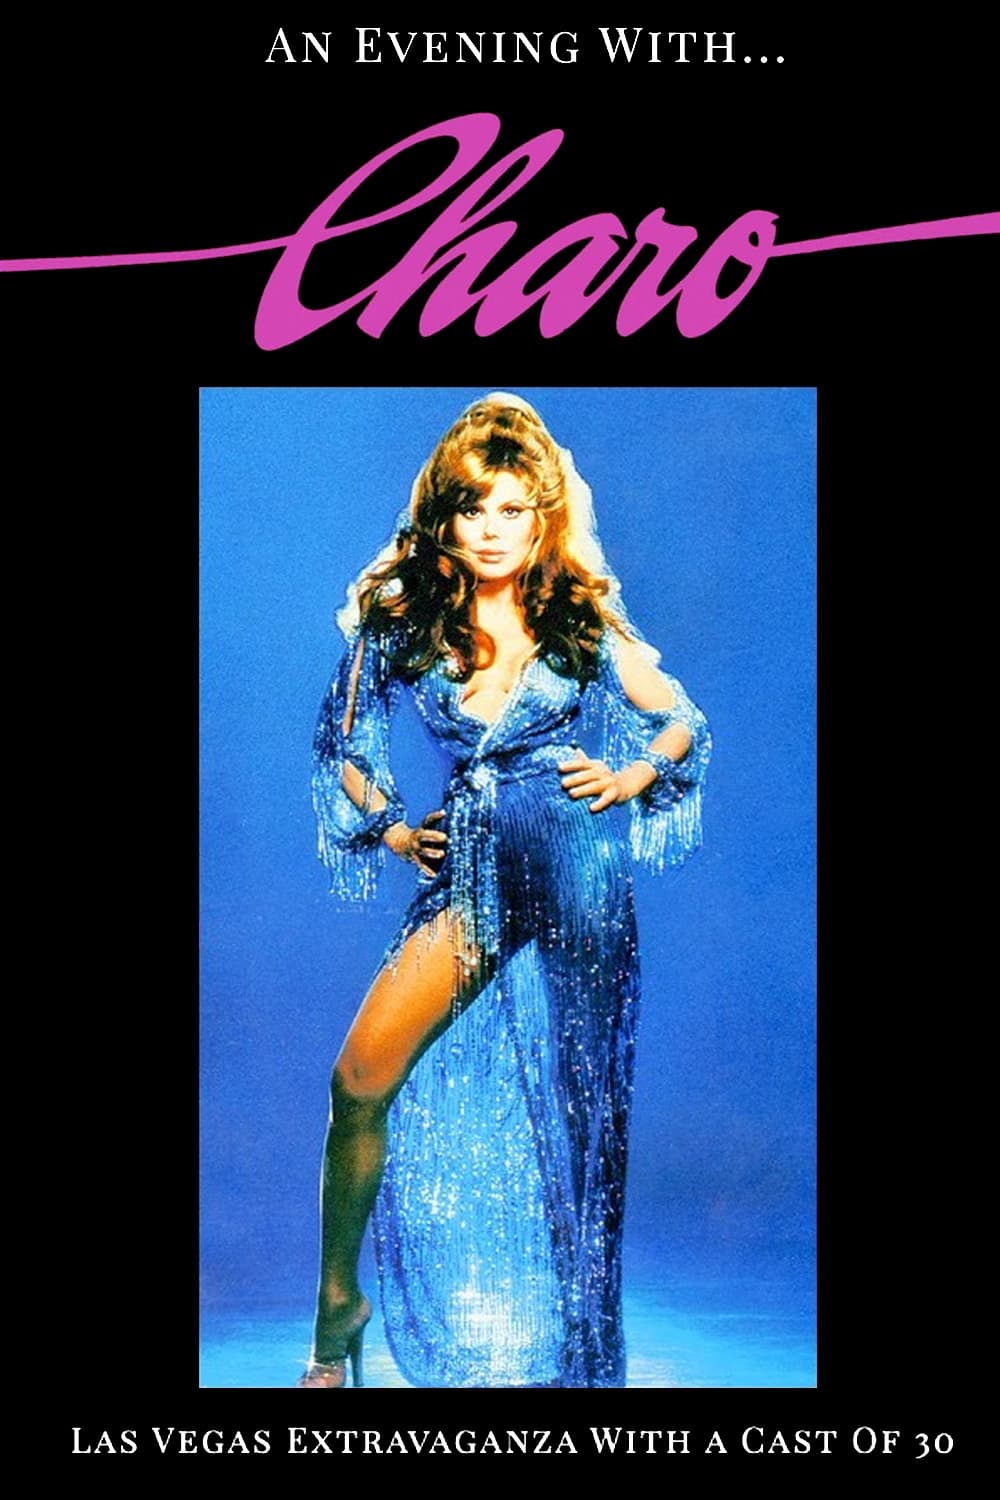 An Evening With Charo! (1988)